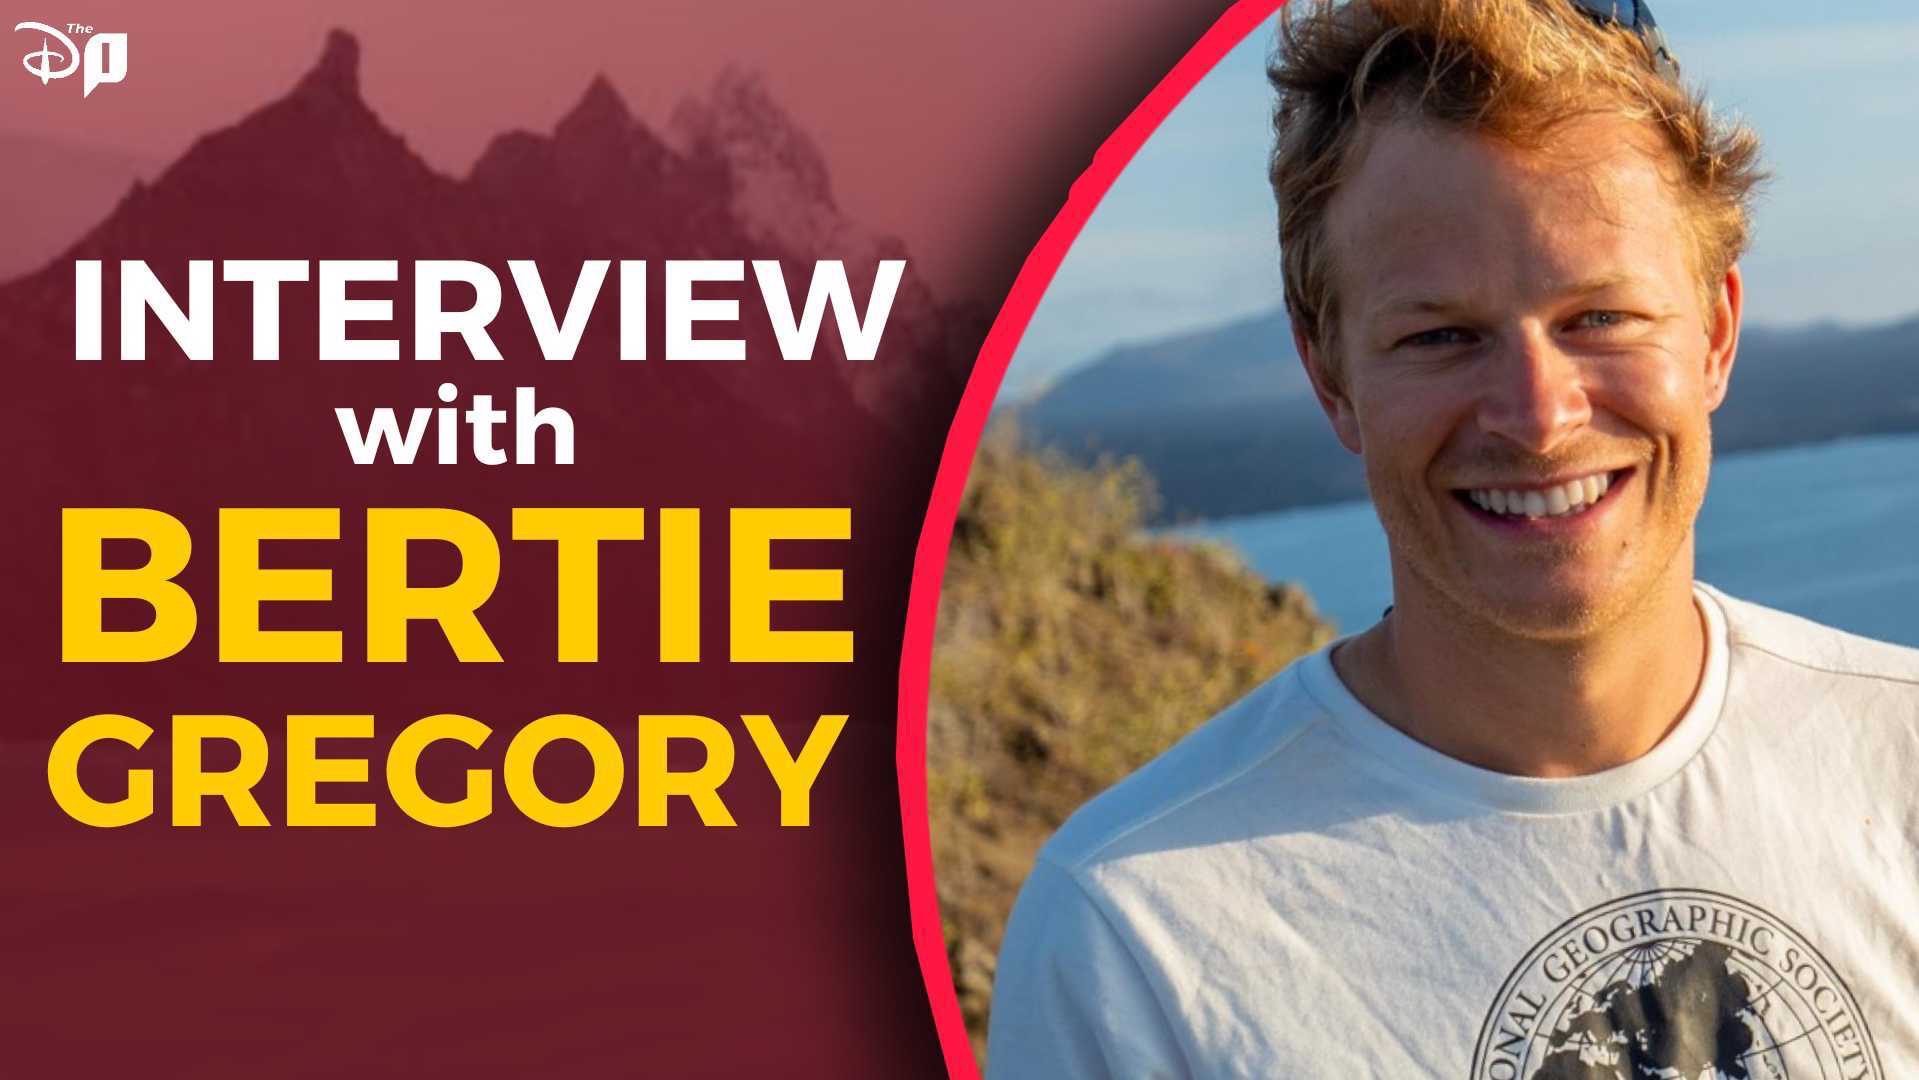 EXCLUSIVE: Bertie Gregory On His ‘Epic’ New Disney+ Series, Up-Close Encounters With Endangered Species & More! (Interview)